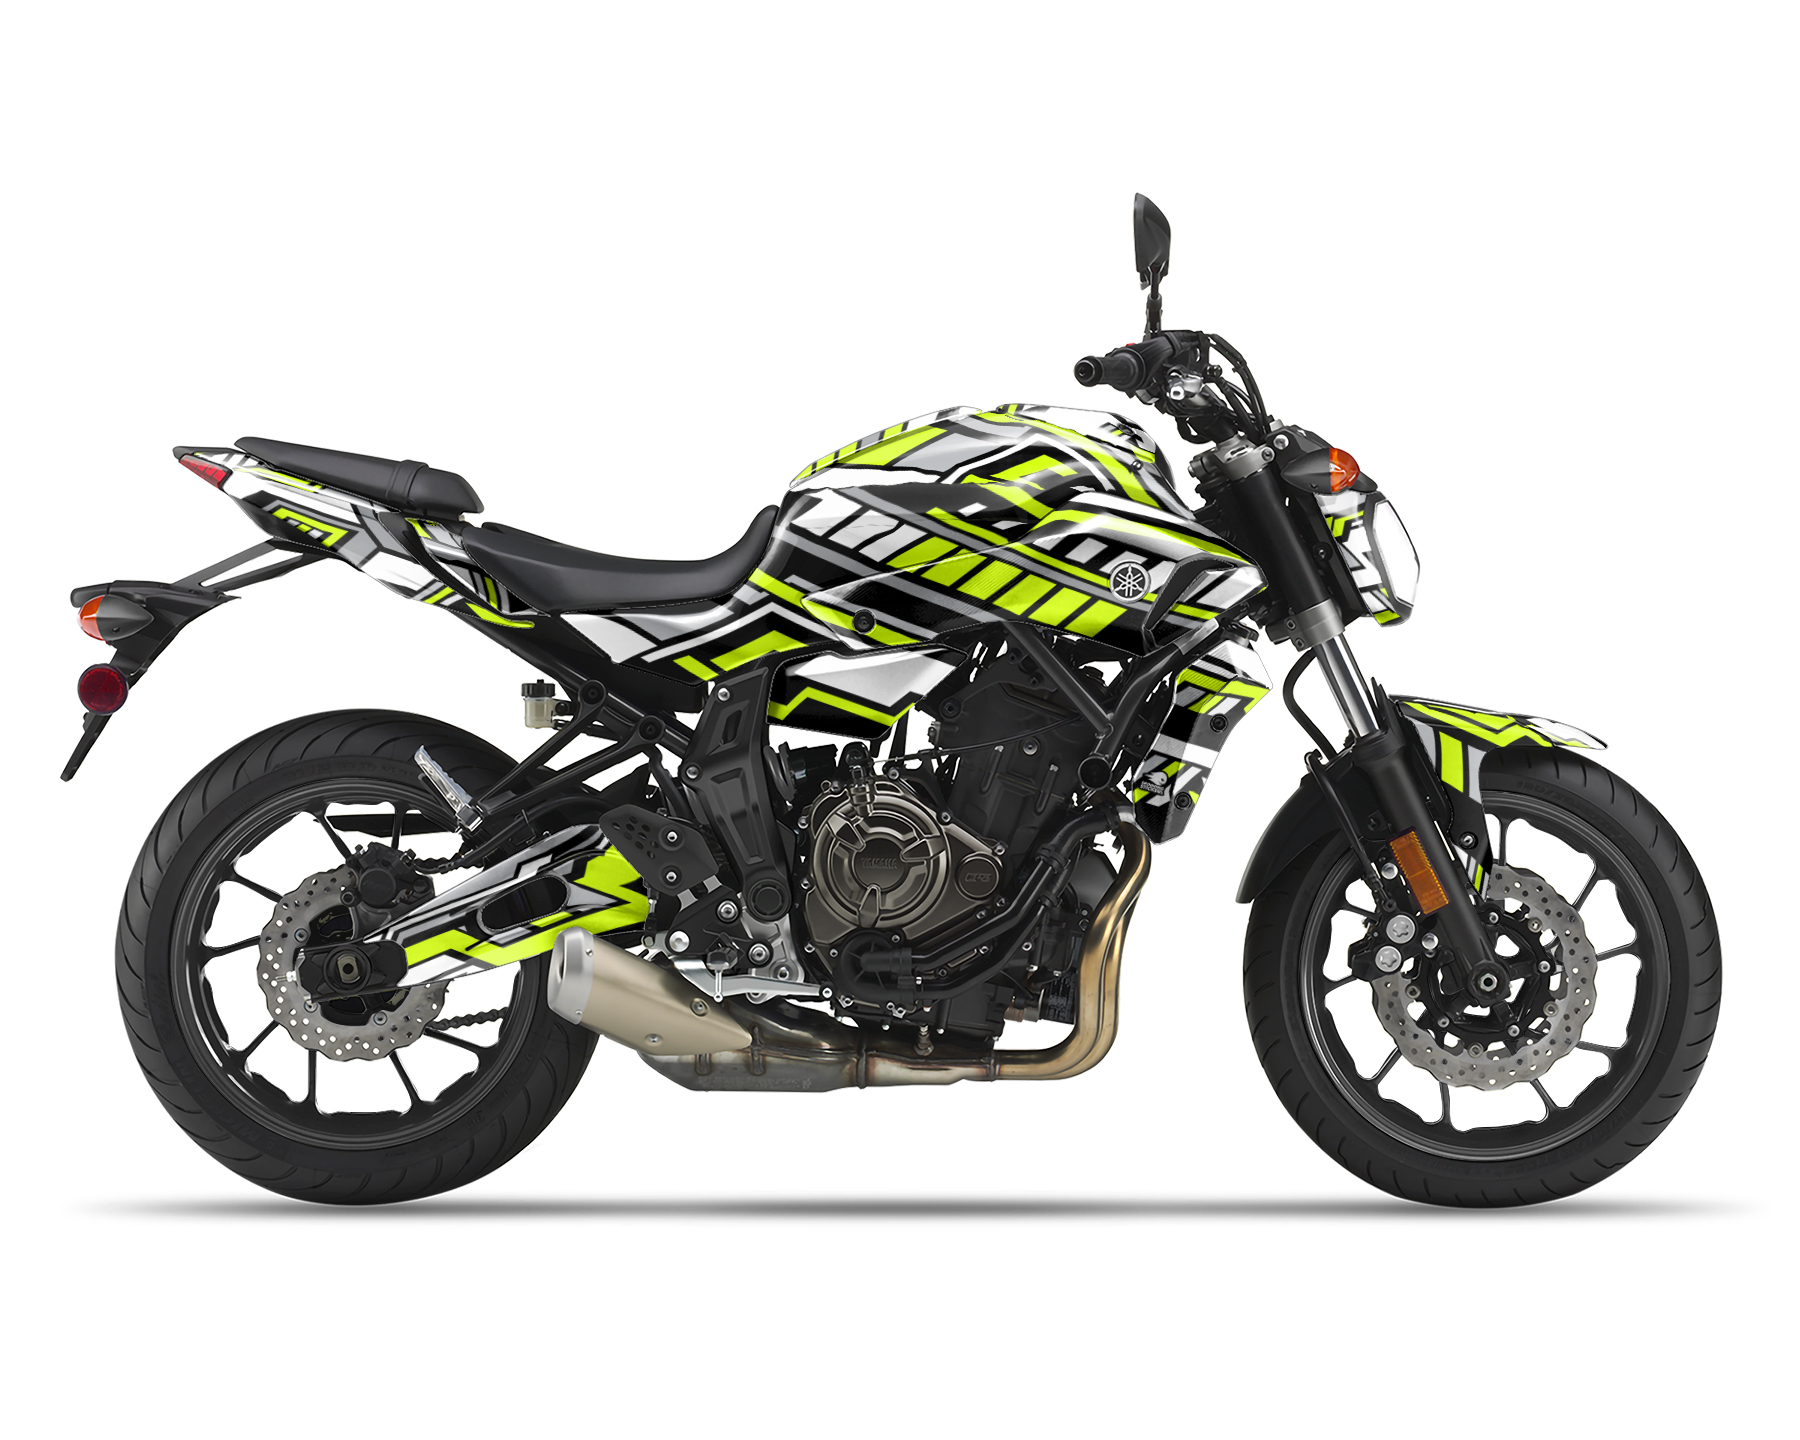 Yamaha MT-07 Motorcycle with signal yellow and white fairing stickers